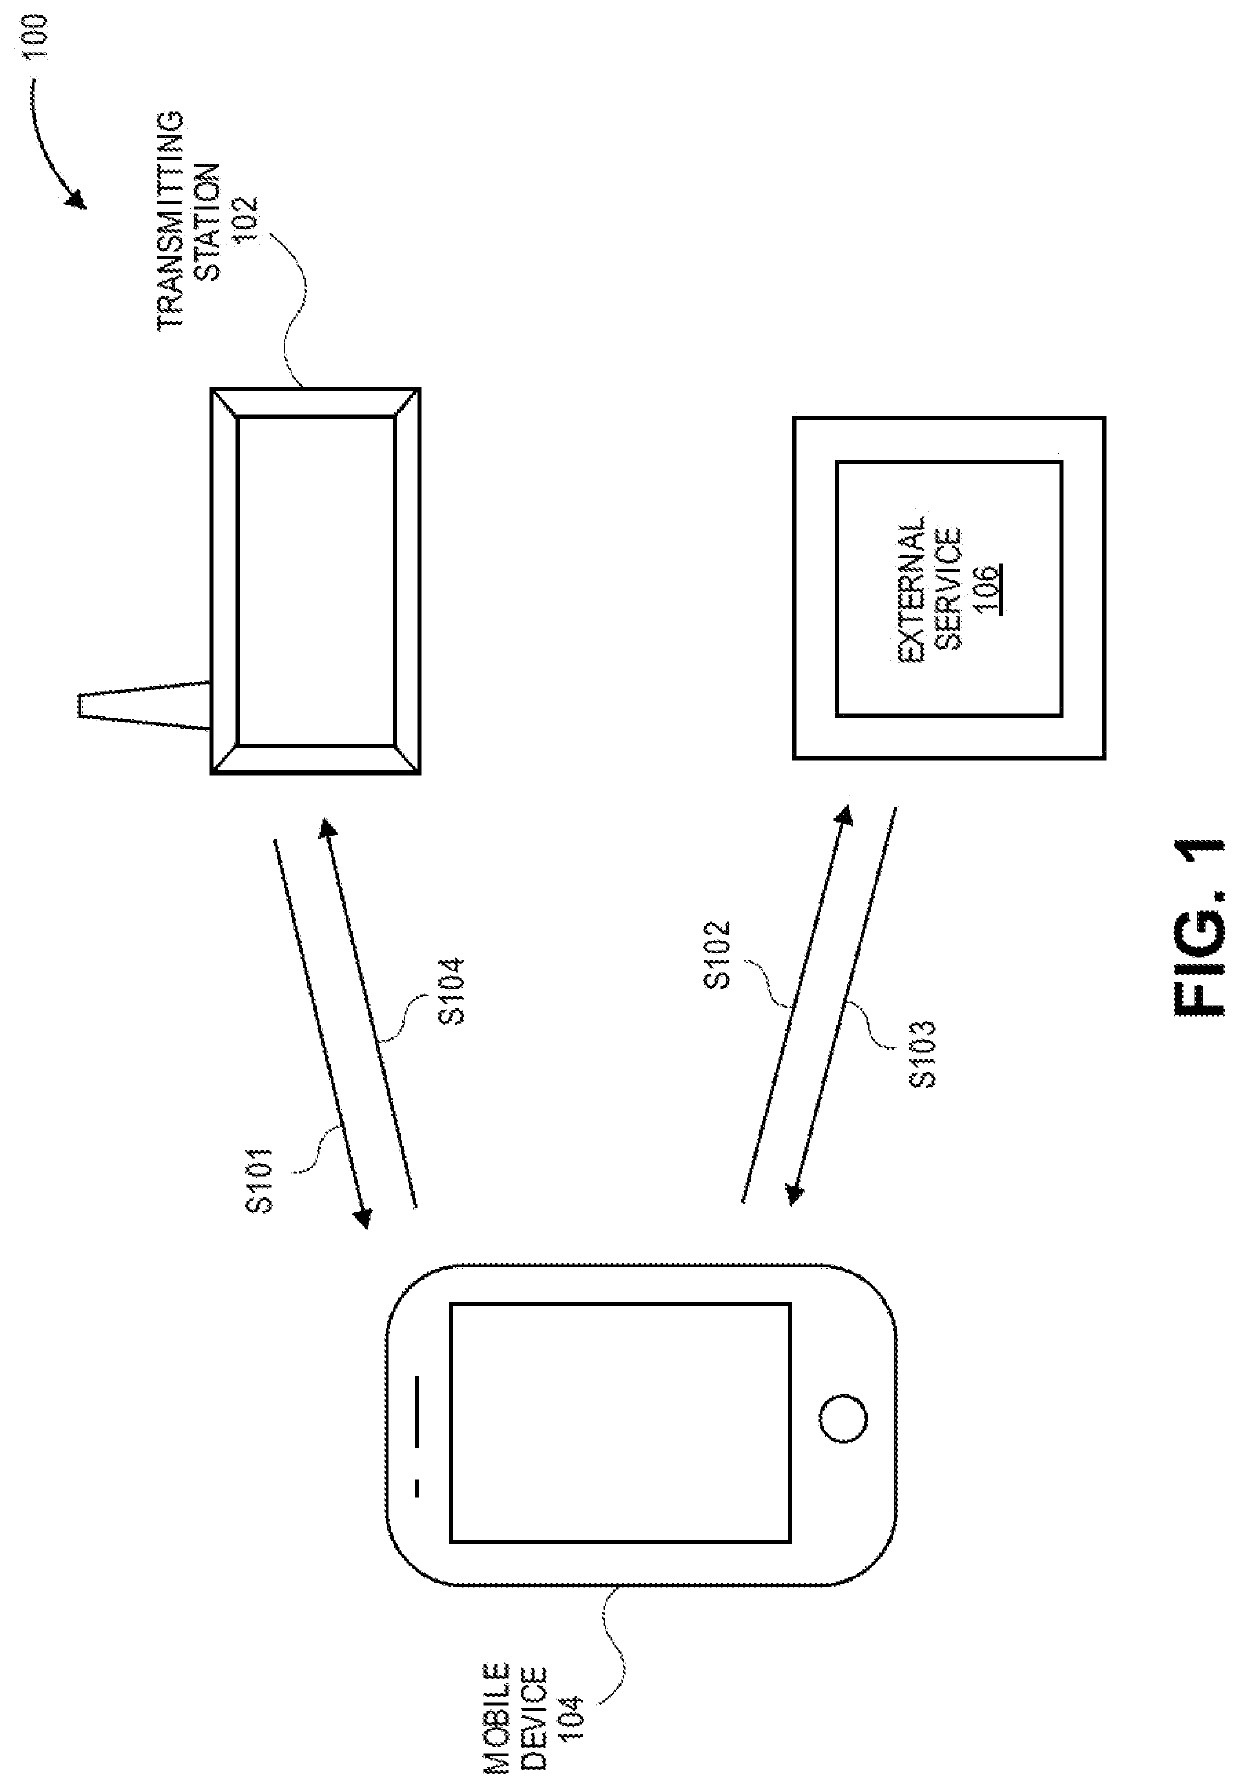 Wireless biometric authentication system and method